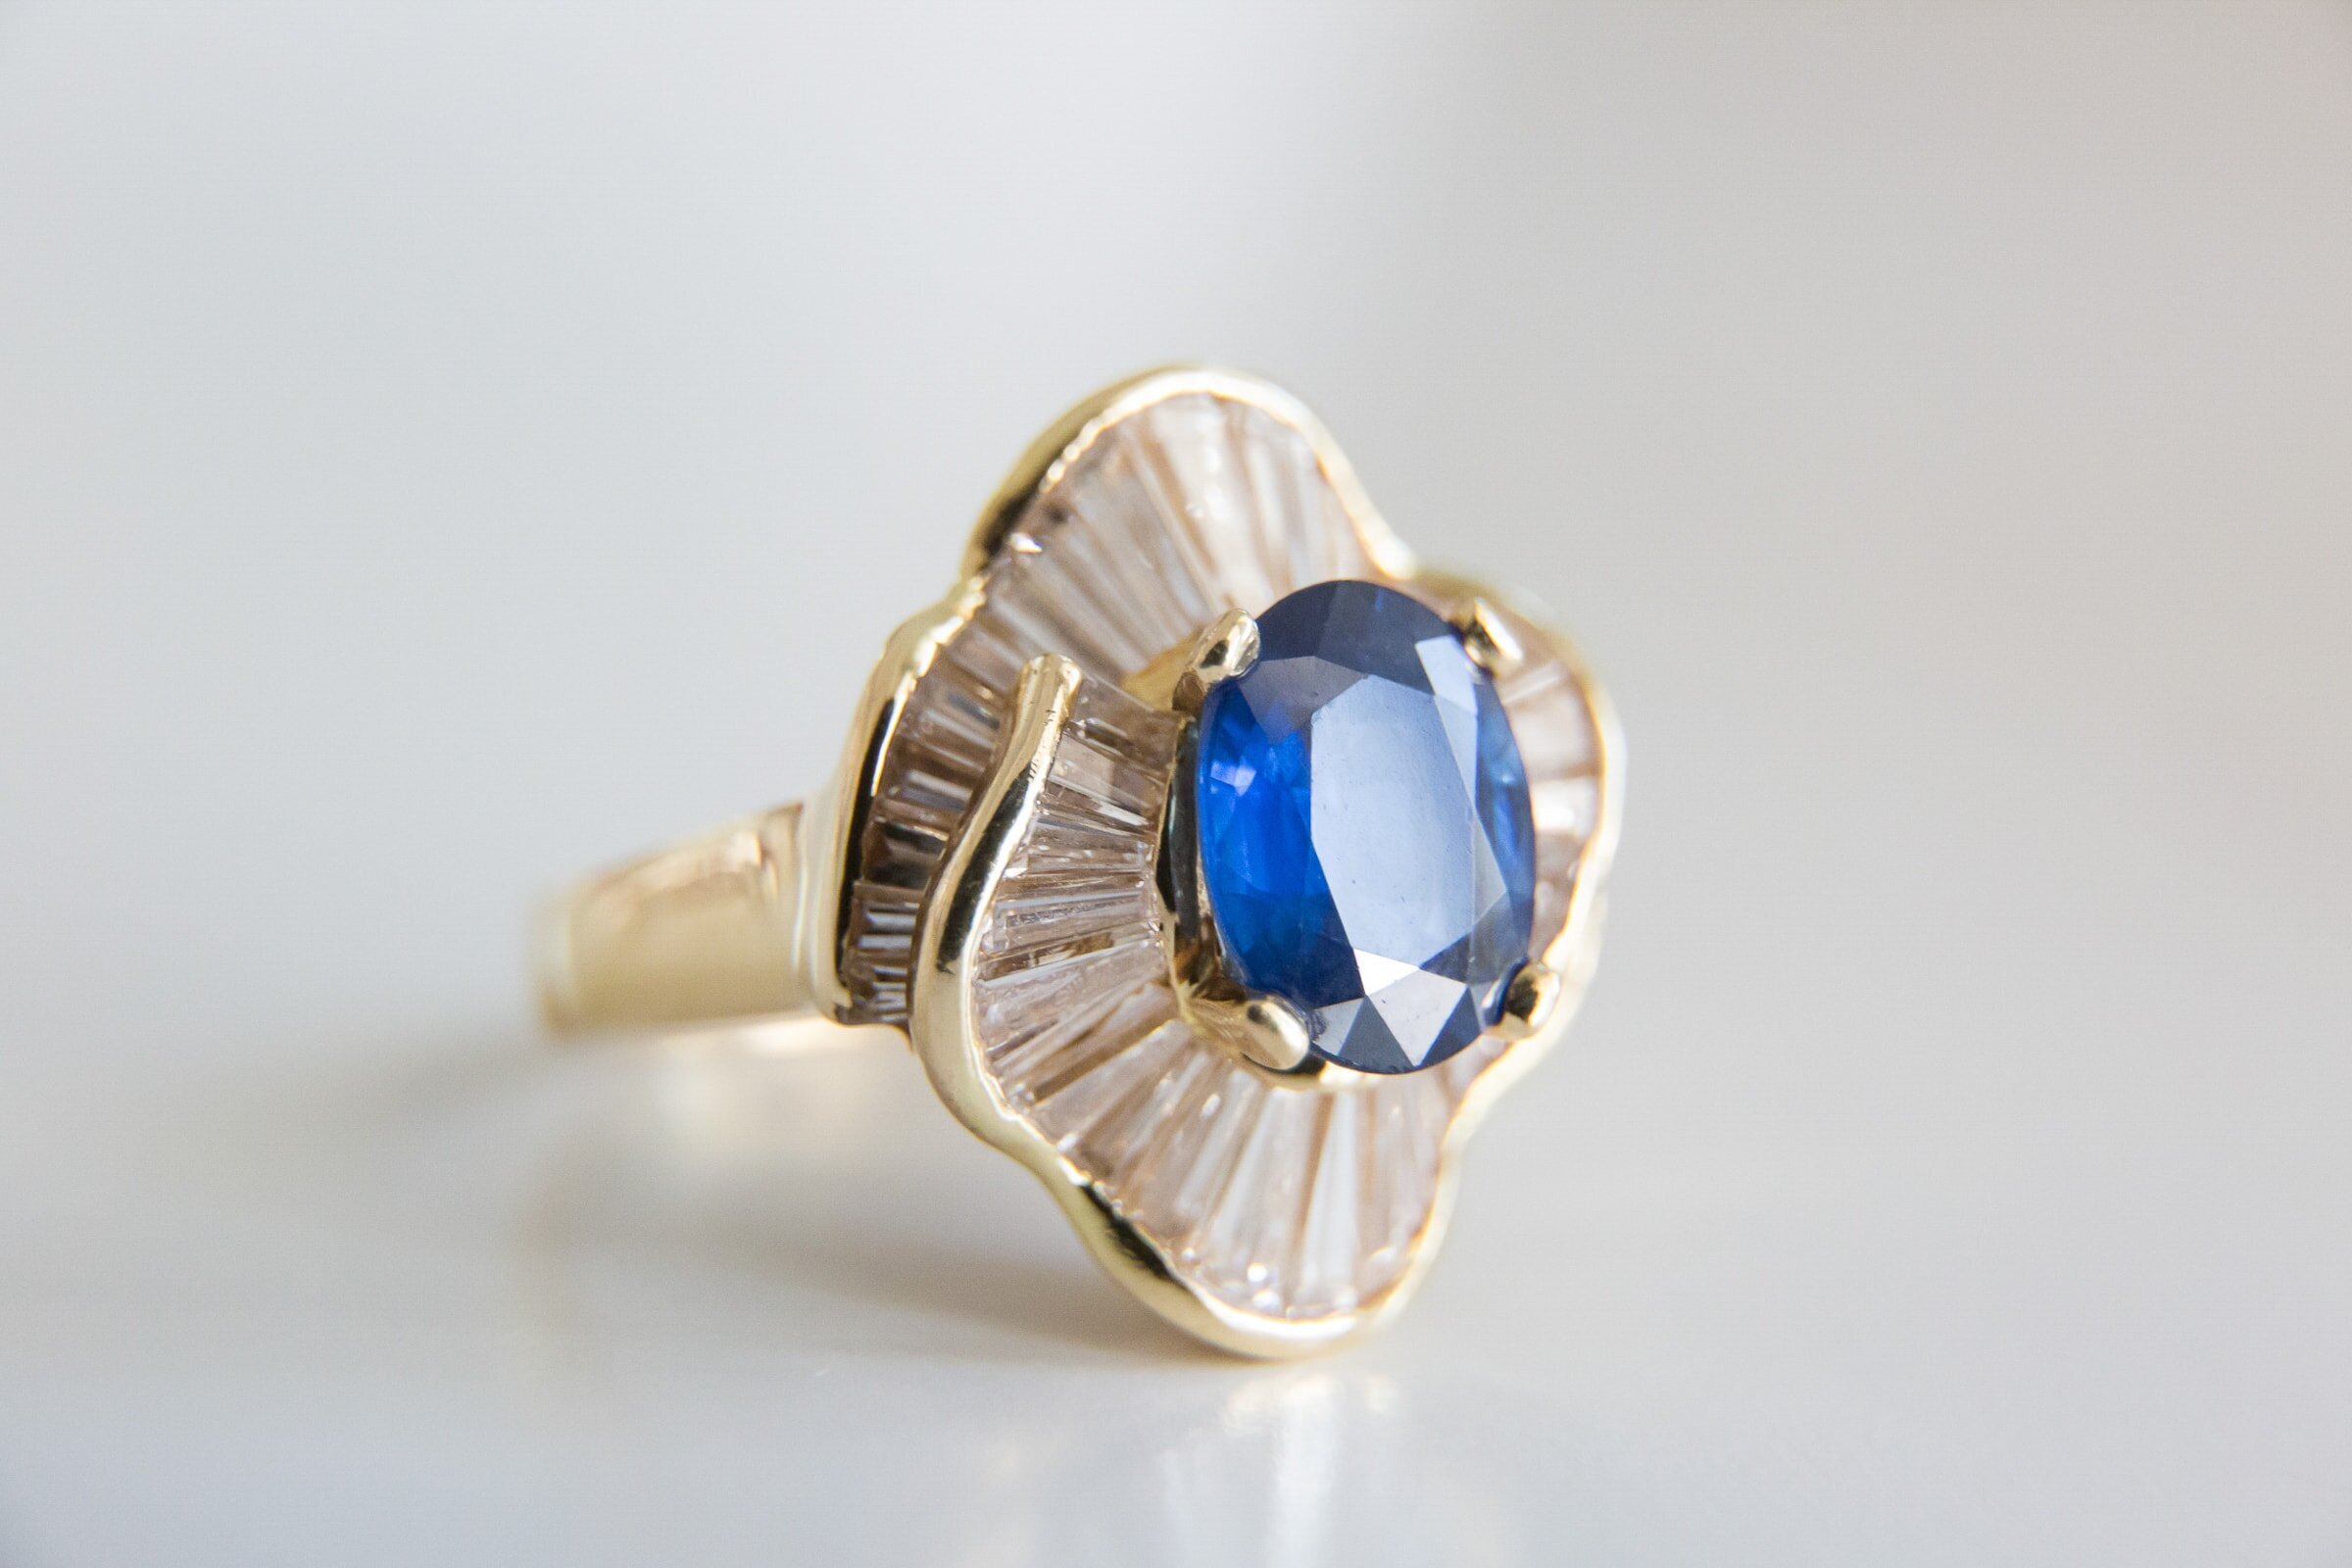 Vintage golden ring with blue gem at the Bradford wedding in New Hill, NC. Best Bradford photographer.